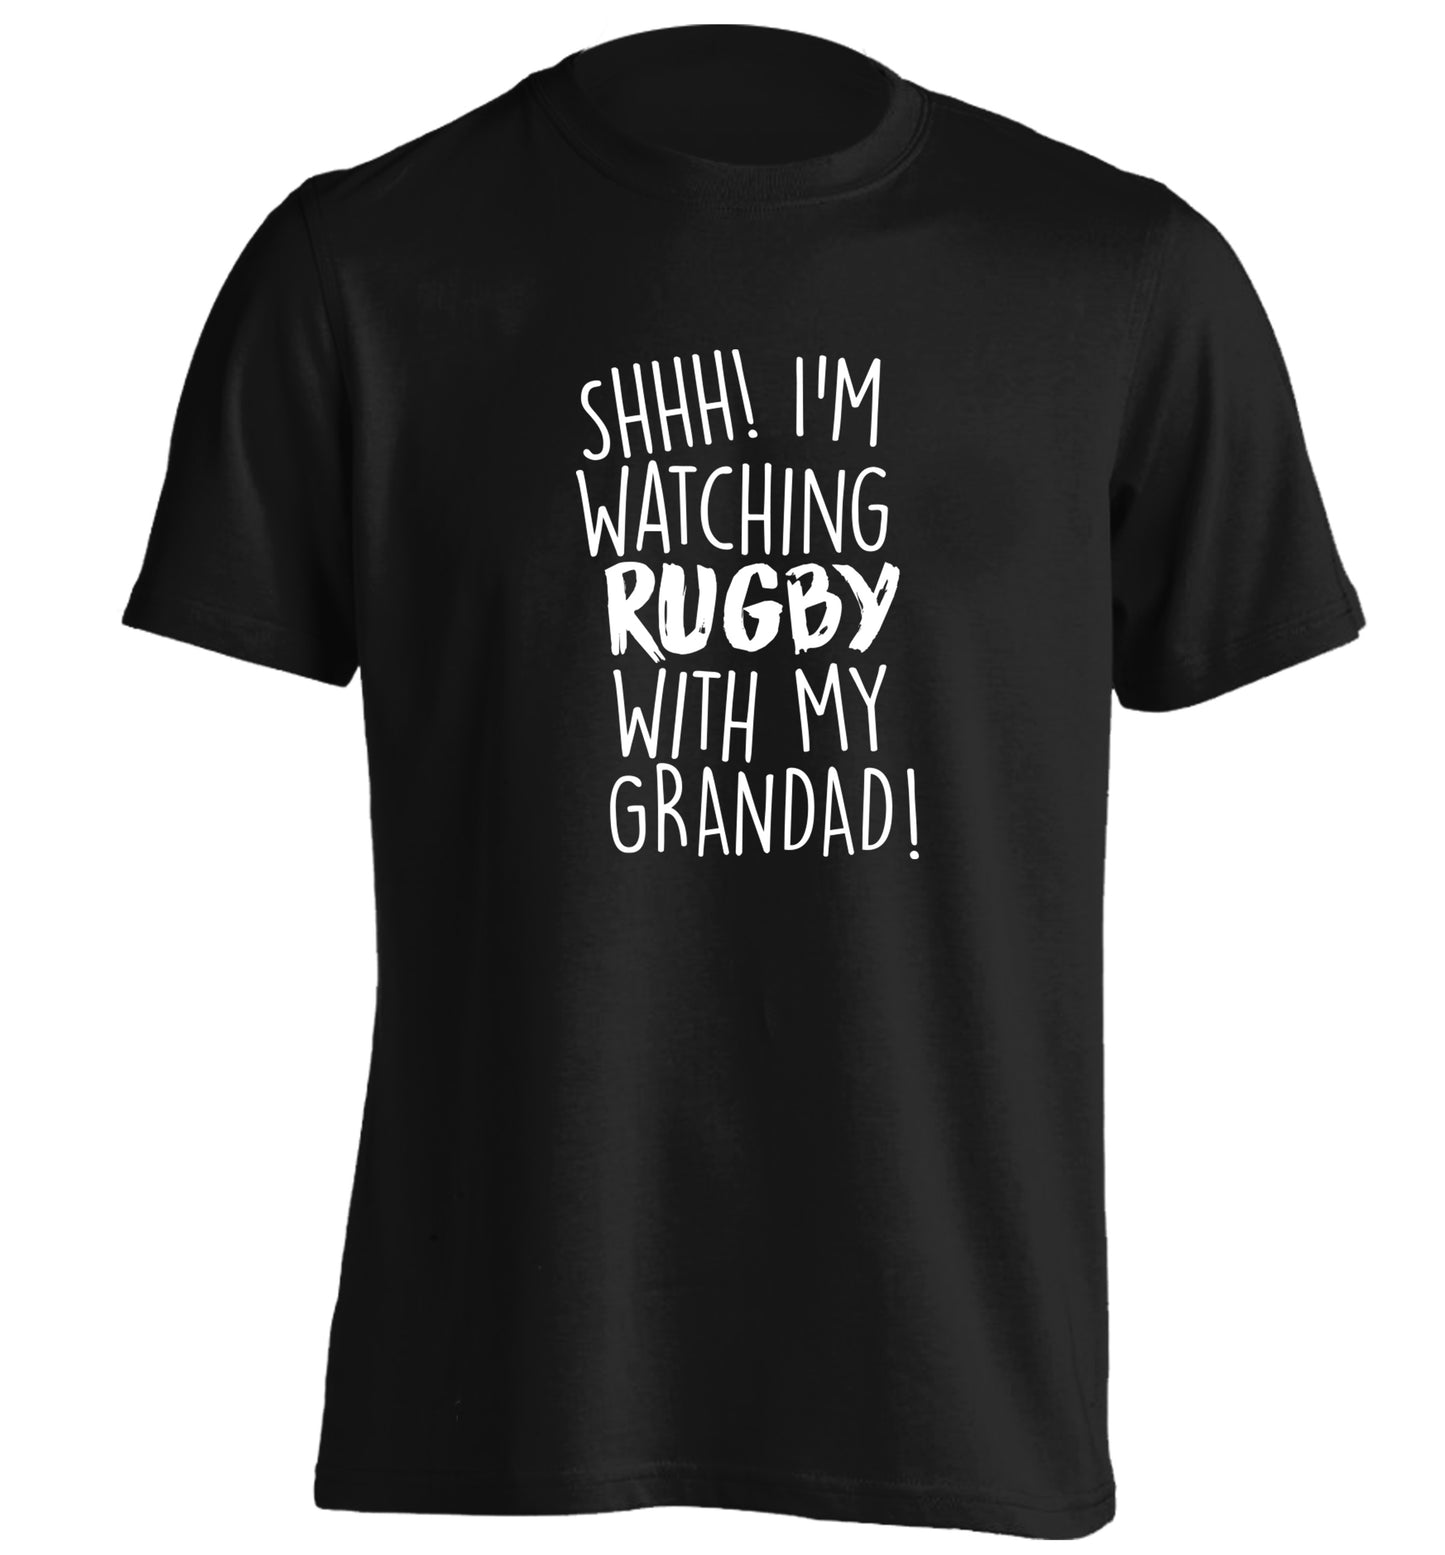 Shh I'm watching rugby with my grandaughter adults unisex black Tshirt 2XL